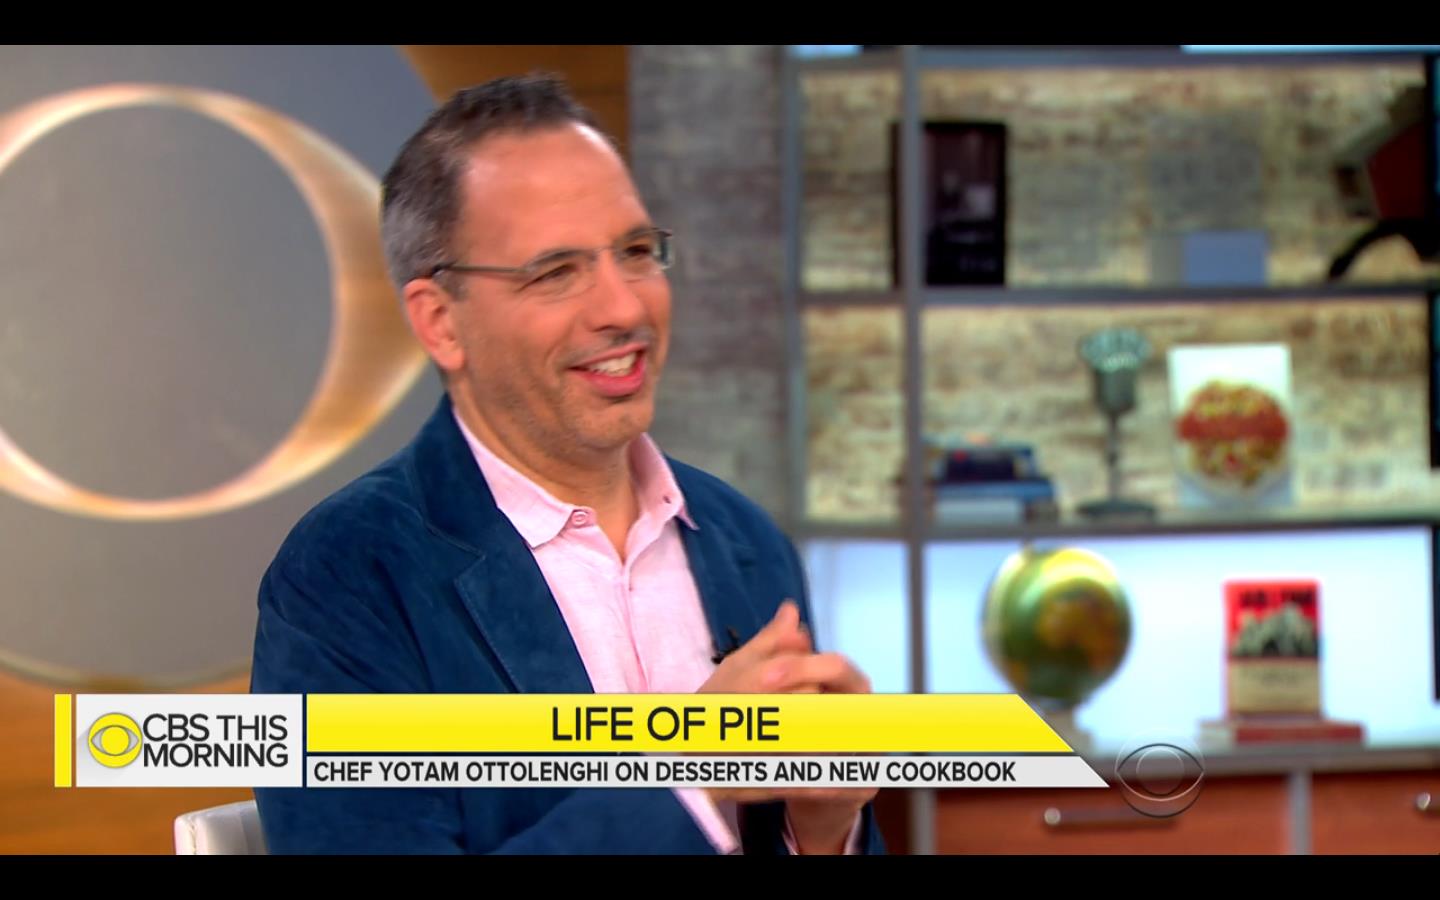 Yotam Otolenghi on CBS This Morning